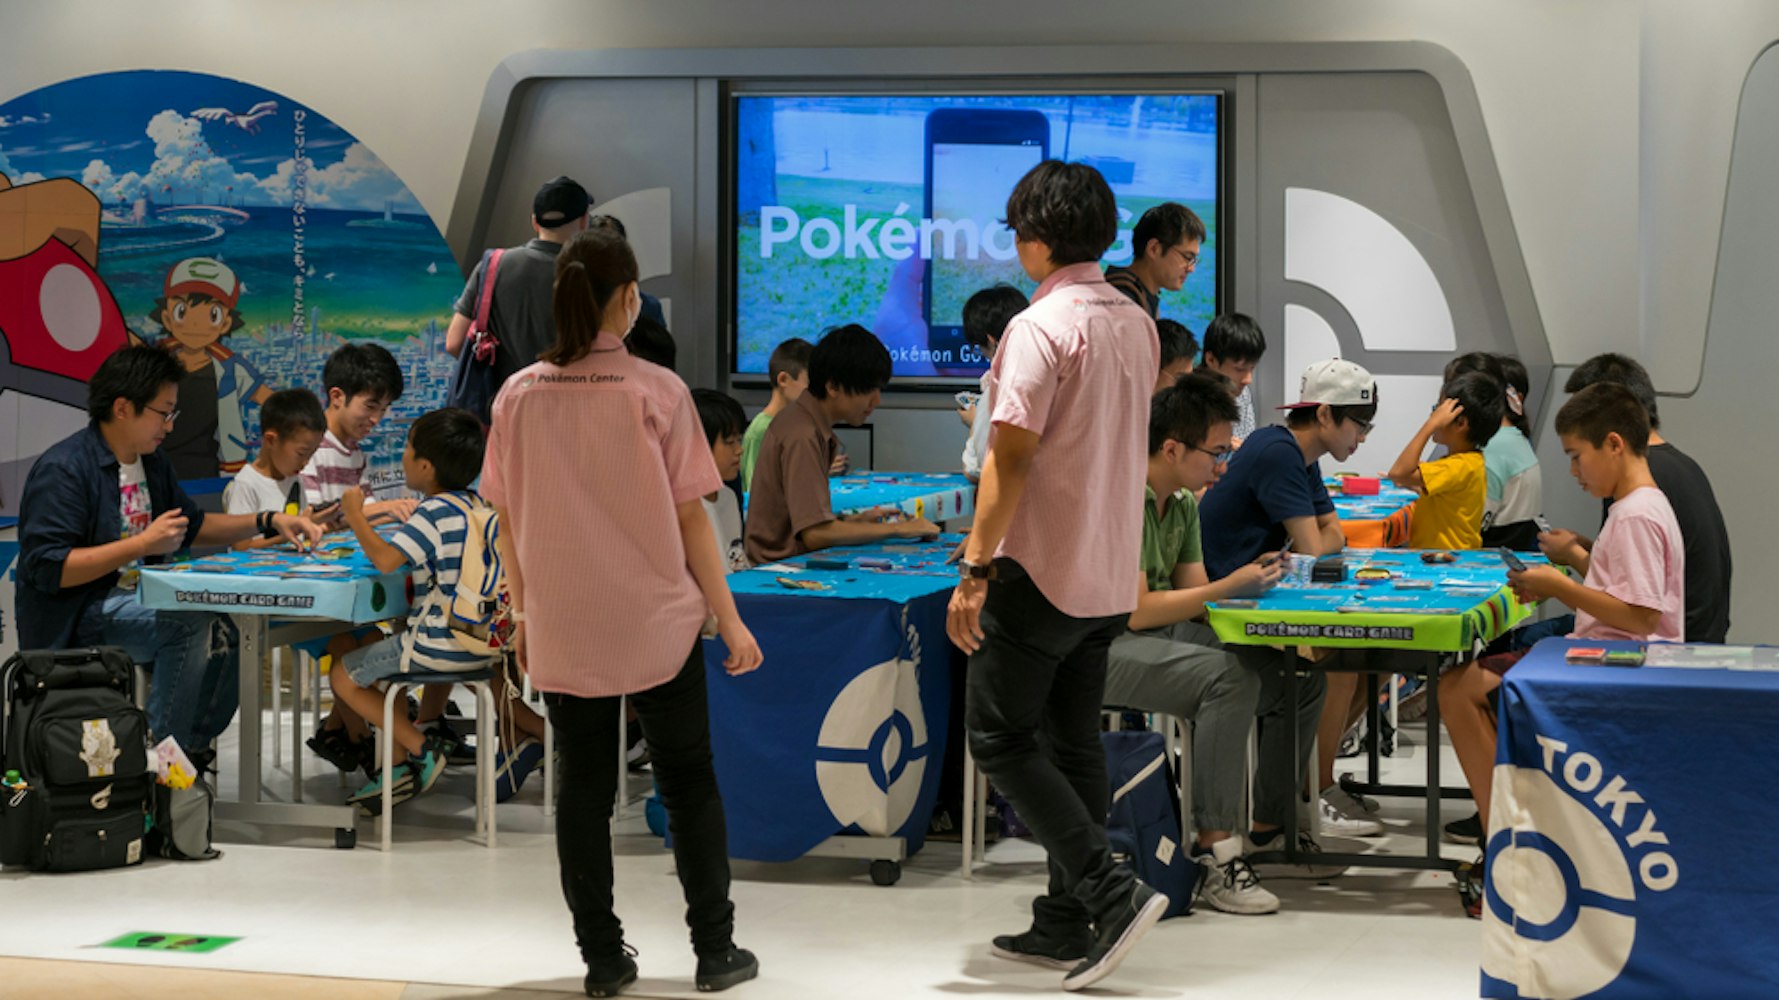 Parents with their children playing Pokemon branded arcade video games at Pokemon Center